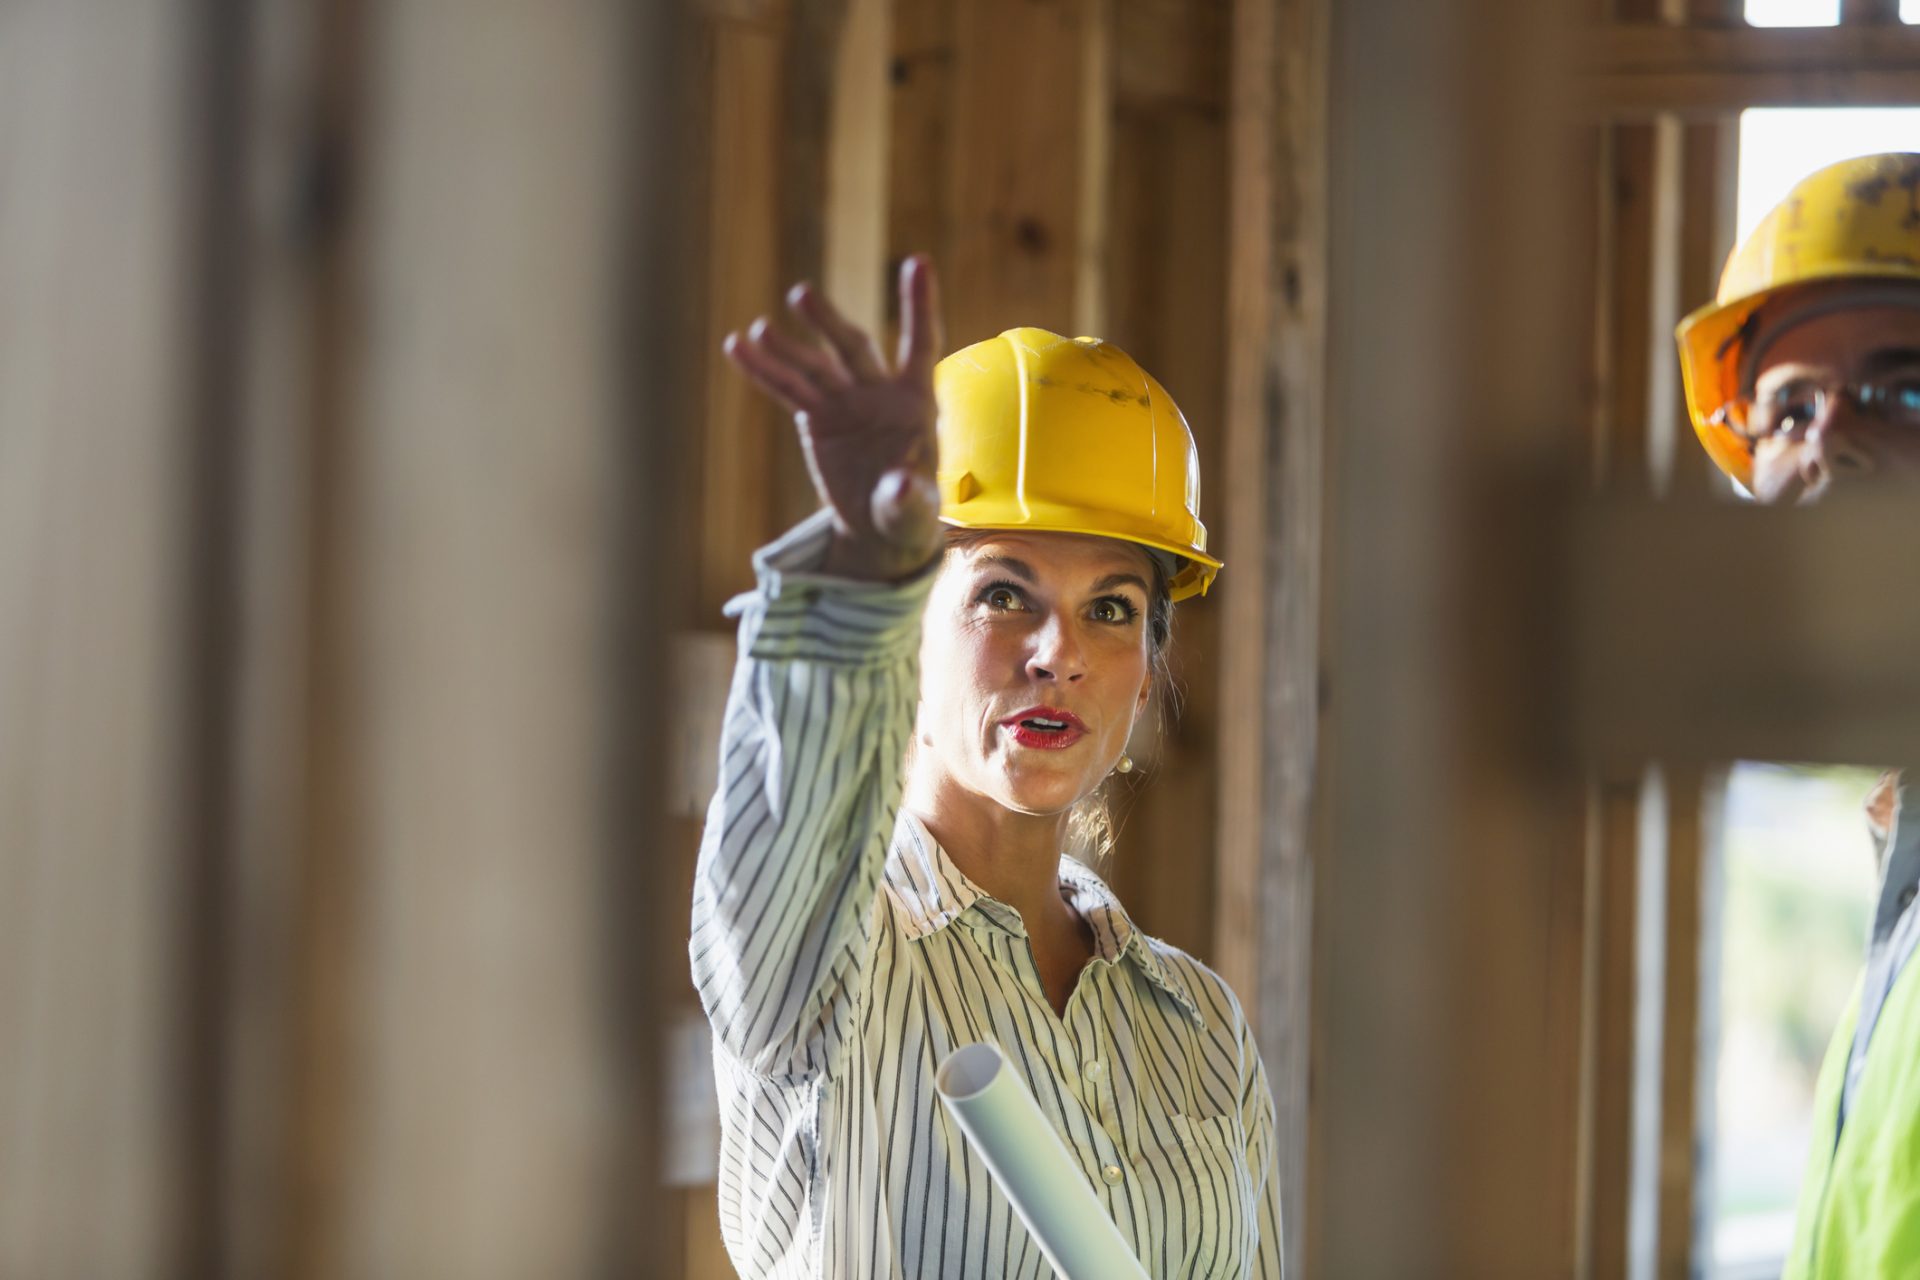 Two workers talking at a construction site, standing in a building in the framing stage.  The focus is on the mature woman, wearing a yellow hard hat, holding a set of rolled-up plans, pointing upward.  The male worker is cropped and partly obsured by the wooden frame.